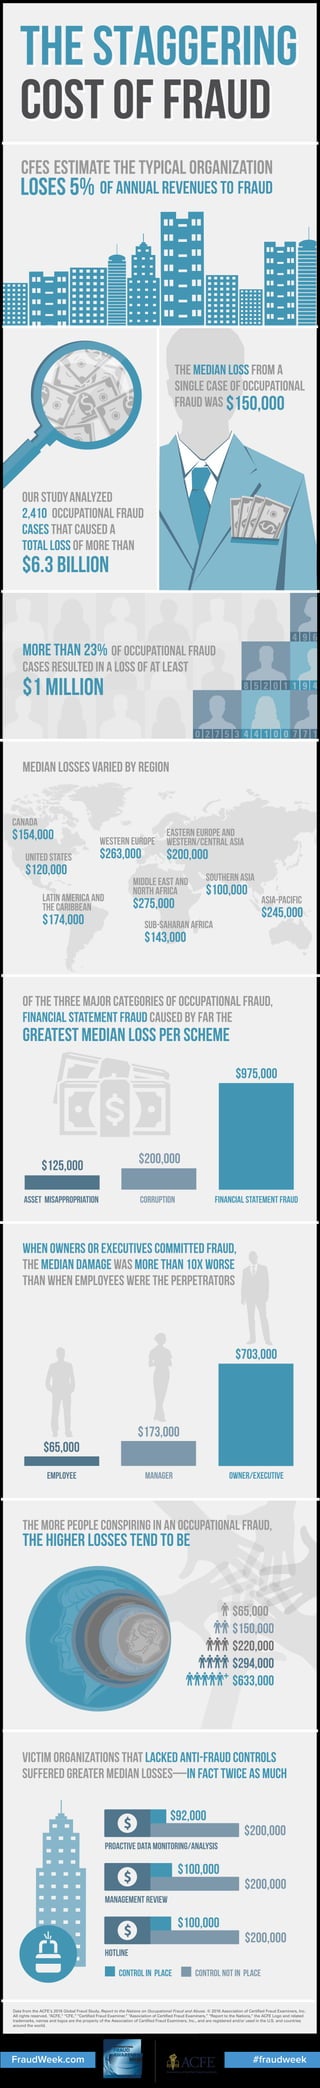 of the three major categories of occupational fraud,
financial statement fraud caused by far the
greatest median loss per scheme
Financial statement fraudAsset misappropriation Corruption
$200,000
$975,000
$125,000
When owners or executives committed fraud,
the MEDIAN damage was more than 10x worse
than when employees were the perpetrators
Owner/ExecutiveEmployee Manager
$173,000
$703,000
$65,000
Median Losses Varied by Region
The more people conspiring in an occupational fraud,
the higher losses tend to be
Victim organizations that lacked anti-fraud controls
suffered greater MEDIAN losses—in fact twice as MUCH
Our studyanalyzeD
2,410 occupational fraud
cases that caused a
total loss of more than
$6.3 billion
The median loss from a
single case of occupational
fraud was $150,000
More than 23% of occupational fraud
cases resulted in a loss of at least
$1 million
4 9 6
8 5 2 0 1
0 2 7 5 3 7 7 1
1 9 4
4 4 1 0 0
Middle East and
North Africa
$275,000
western europe
$263,000
asia-pacific
$245,000
Eastern Europe and
Western/Central Asia
$200,000
Latin America and
the Caribbean
$174,000
canada
$154,000
Sub-Saharan Africa
$143,000
united states
$120,000 southern asia
$100,000
Proactive Data Monitoring/Analysis
Management Review
Hotline
$92,000
$100,000
control in place control NOT in place
$200,000
$200,000
$200,000
$100,000
$65,000
$150,000
$220,000
$294,000
$633,000
THE STAGGERING
COST OF FRAUD
THE STAGGERING
COST OF FRAUD
THE STAGGERING
COST OF FRAUD
Data from the ACFE’s 2016 Global Fraud Study, Report to the Nations on Occupational Fraud and Abuse. © 2016 Association of Certified Fraud Examiners, Inc.
All rights reserved. “ACFE,” “CFE,” “Certified Fraud Examiner,” “Association of Certified Fraud Examiners,” “Report to the Nations,” the ACFE Logo and related
trademarks, names and logos are the property of the Association of Certified Fraud Examiners, Inc., and are registered and/or used in the U.S. and countries
around the world.
loses 5% of annual revenues to fraud
CFEs estimate the typical organization
#fraudweekFraudWeek.com
Fraud Week is sponsored by
 